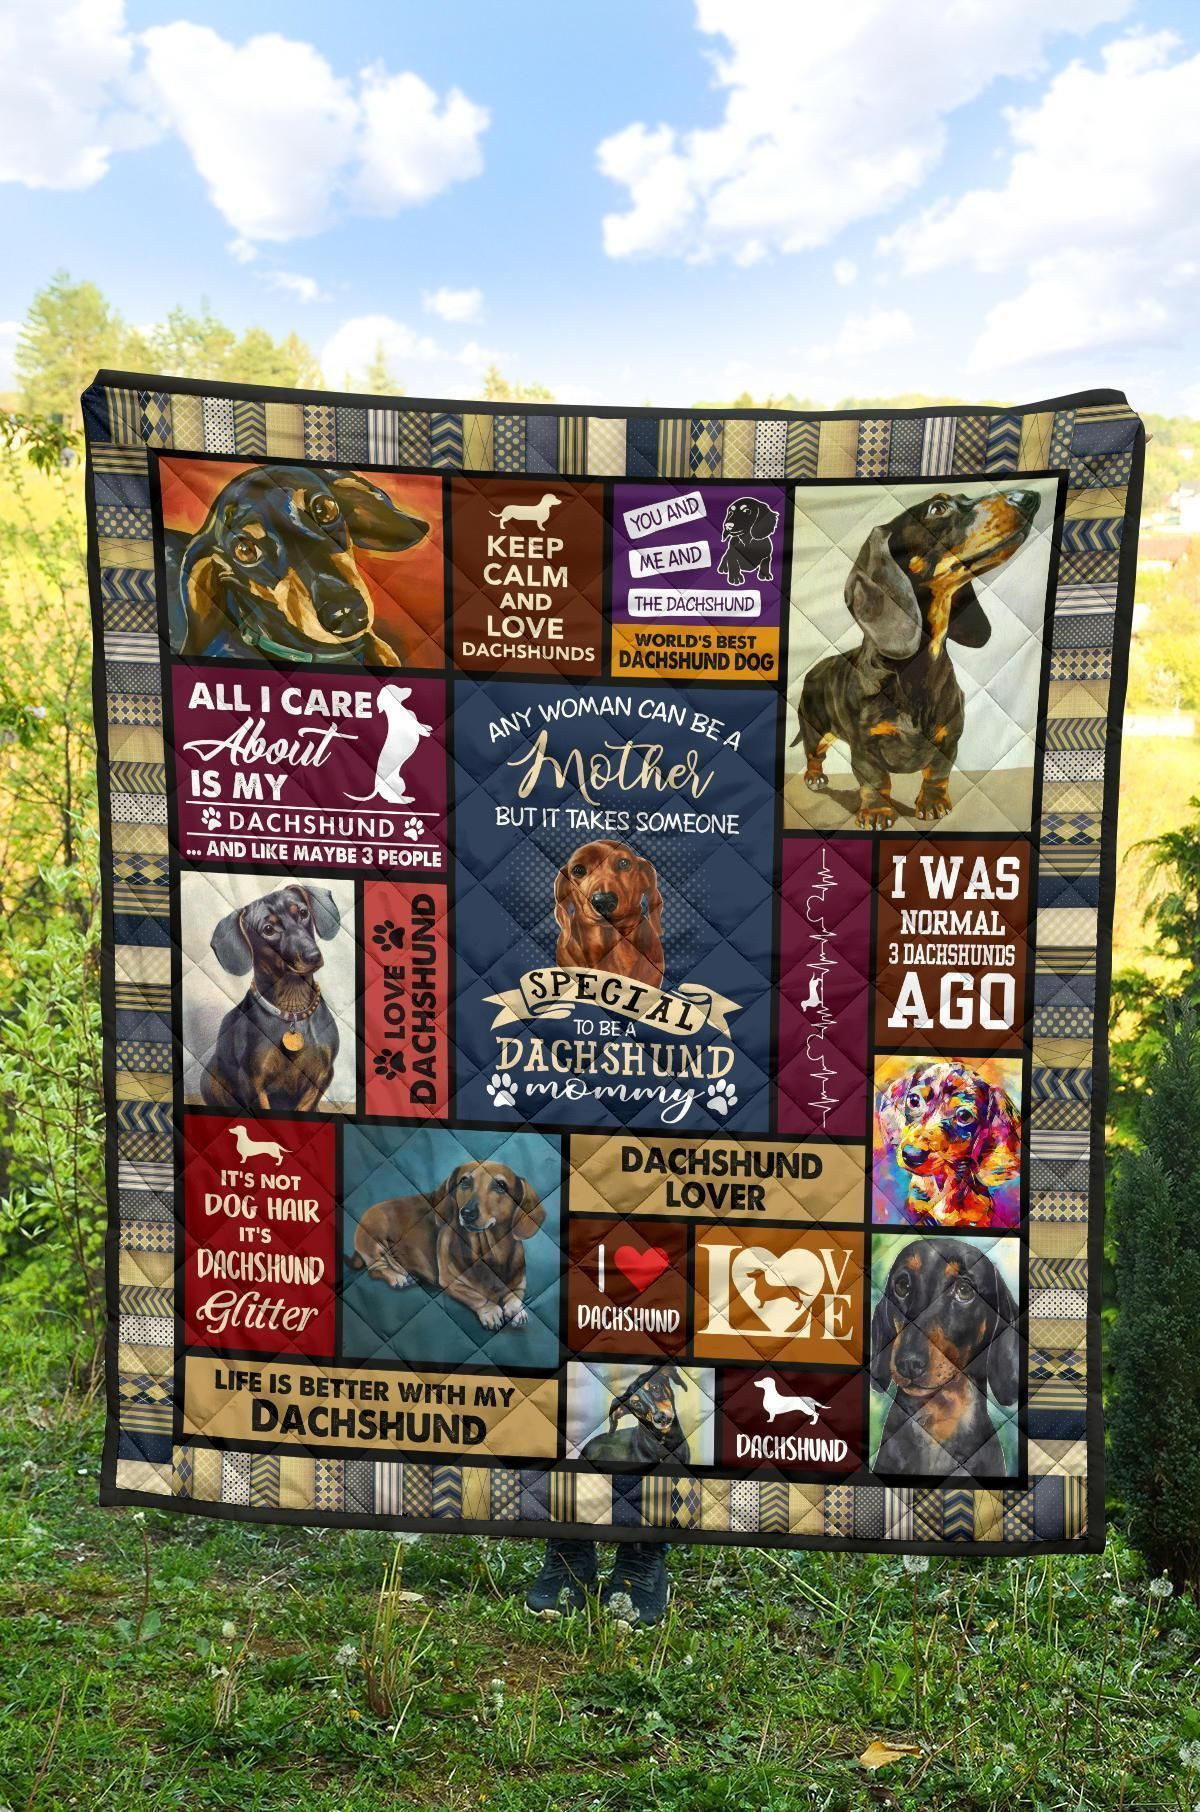 Life is better with my dachshund Special to be a Mommy Dachshund Funny All I care about is my dachshund Quilt Blanket TN01